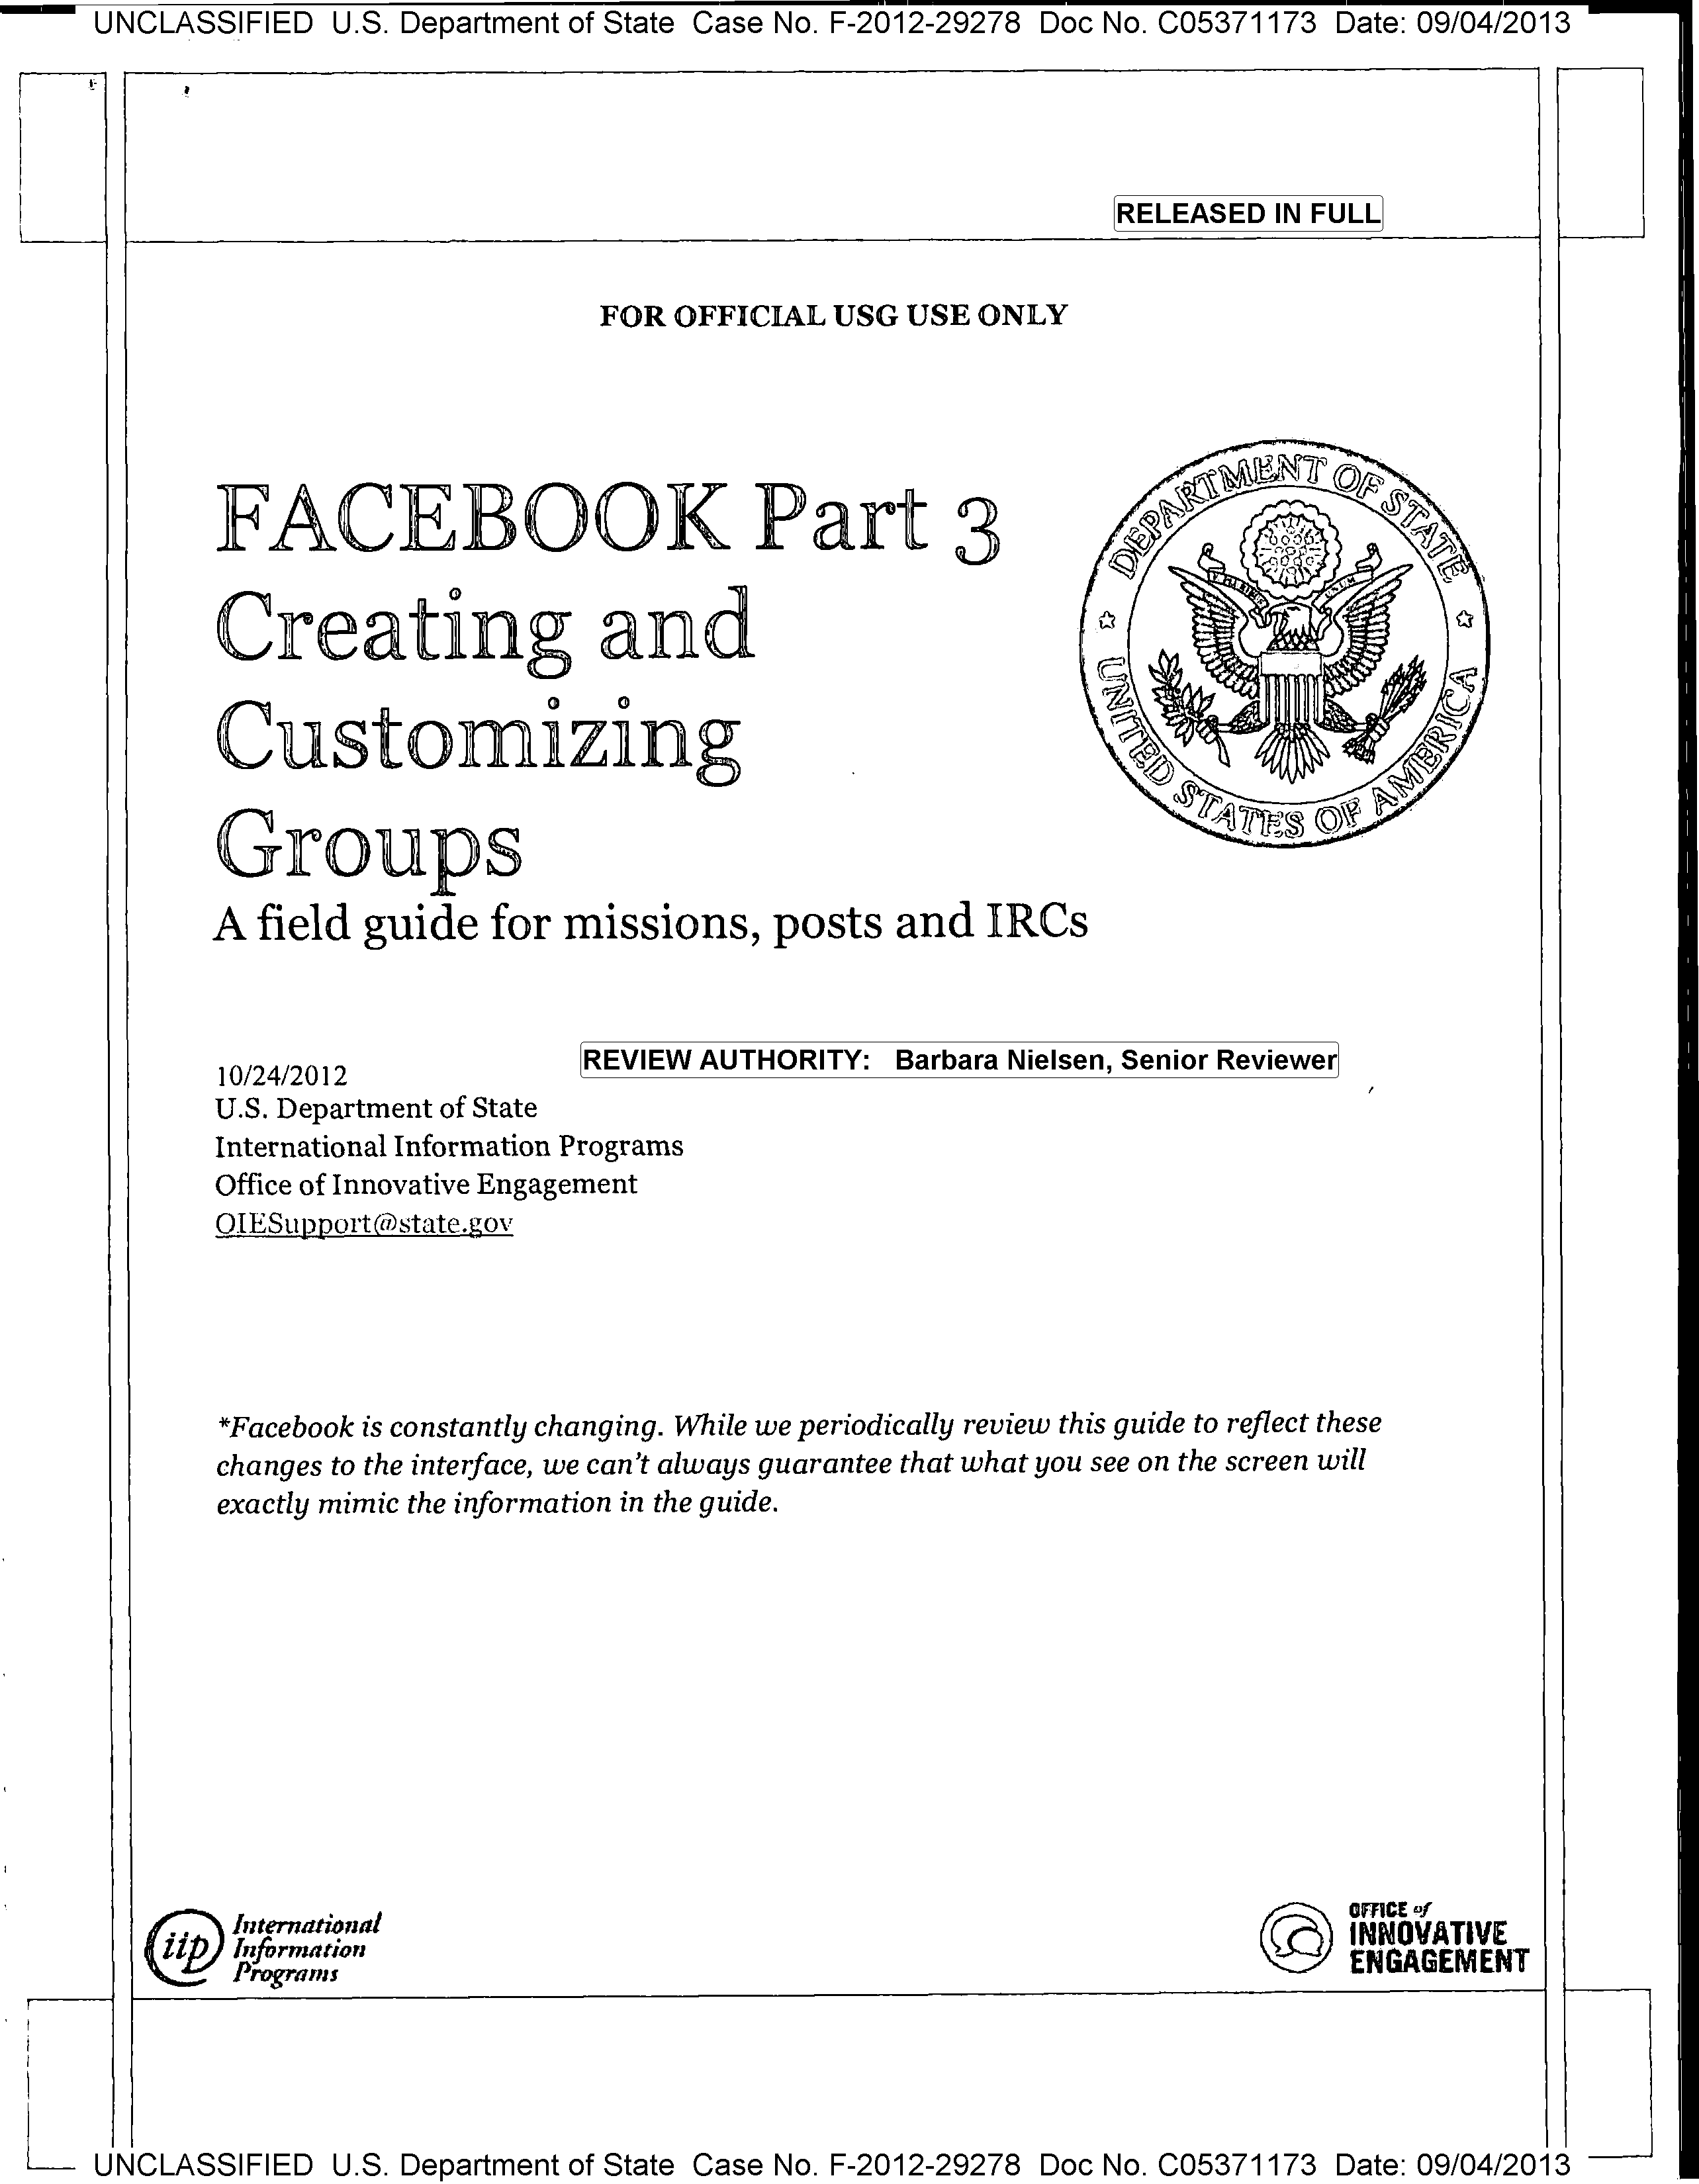 Department of State. Facebook Part 3 Creating and Customizing Groups - A field guide for missions, posts and IRCs. International Information Programs, Office of Innovative Engagement, Oct. 24, 2012. Judicial Watch v. U.S. State Department, Doc. No. C05371173, Case No. F-2012-29278, 09/04/2013.